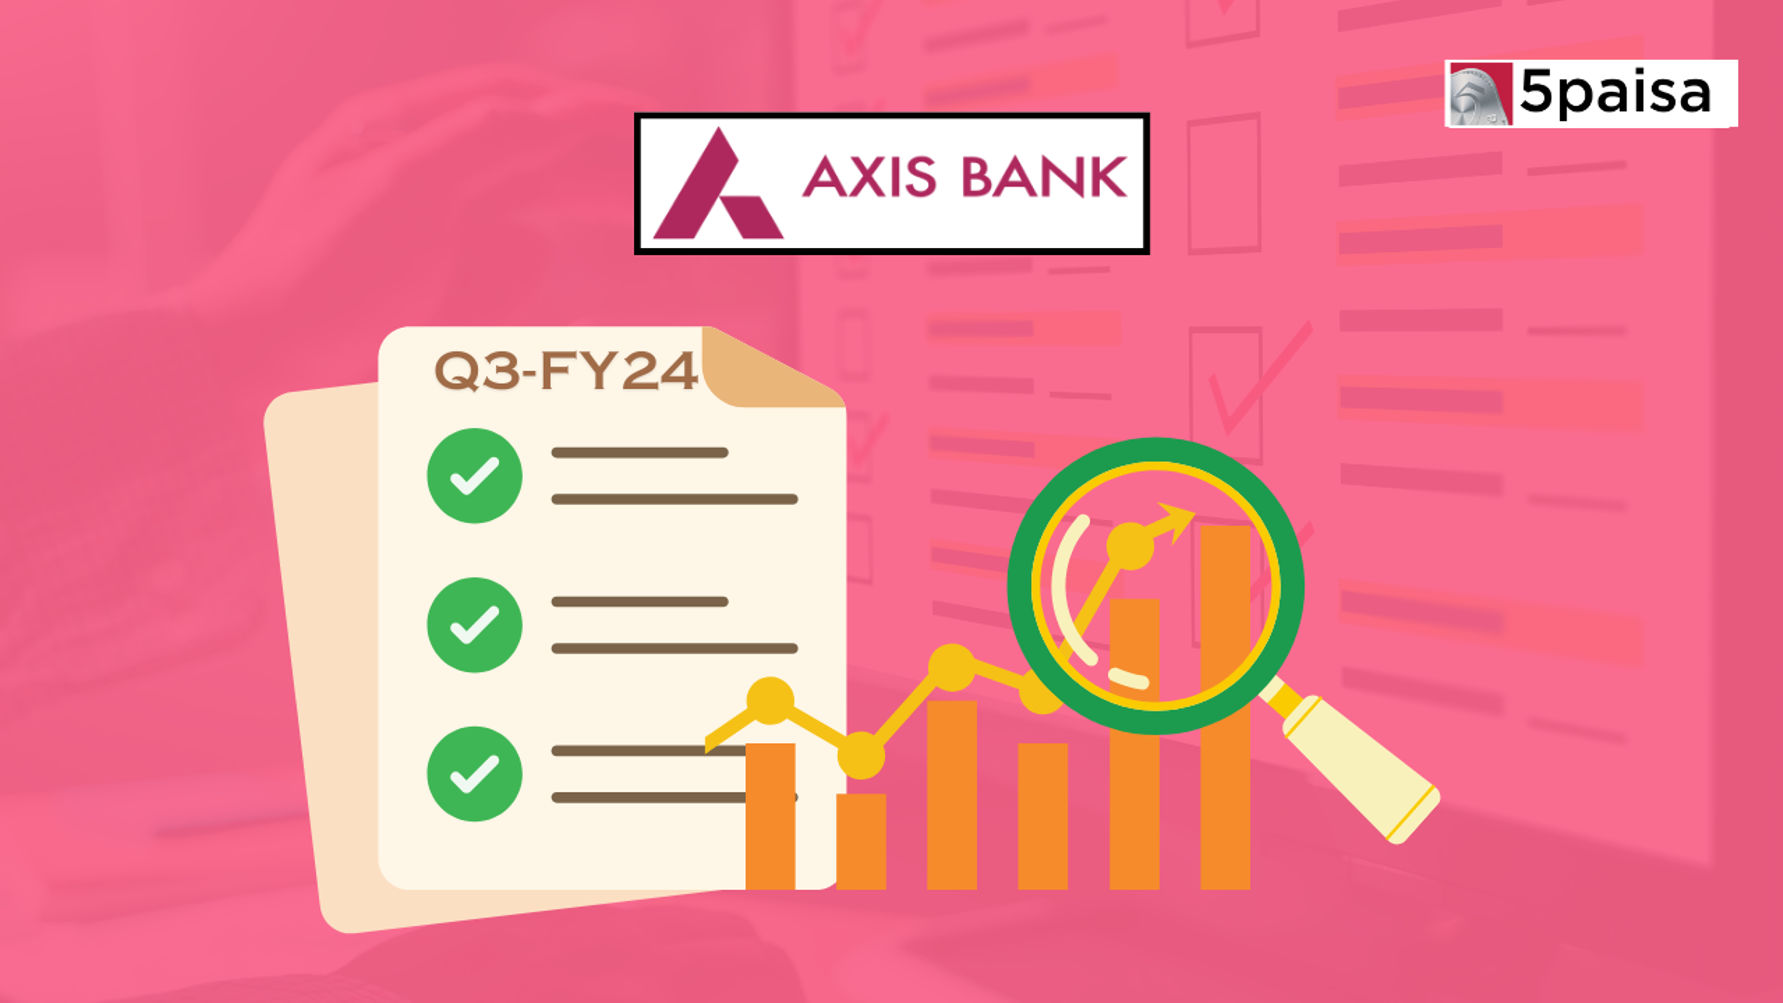 Axis Bank Q3-FY24 Conference Operational Highlights